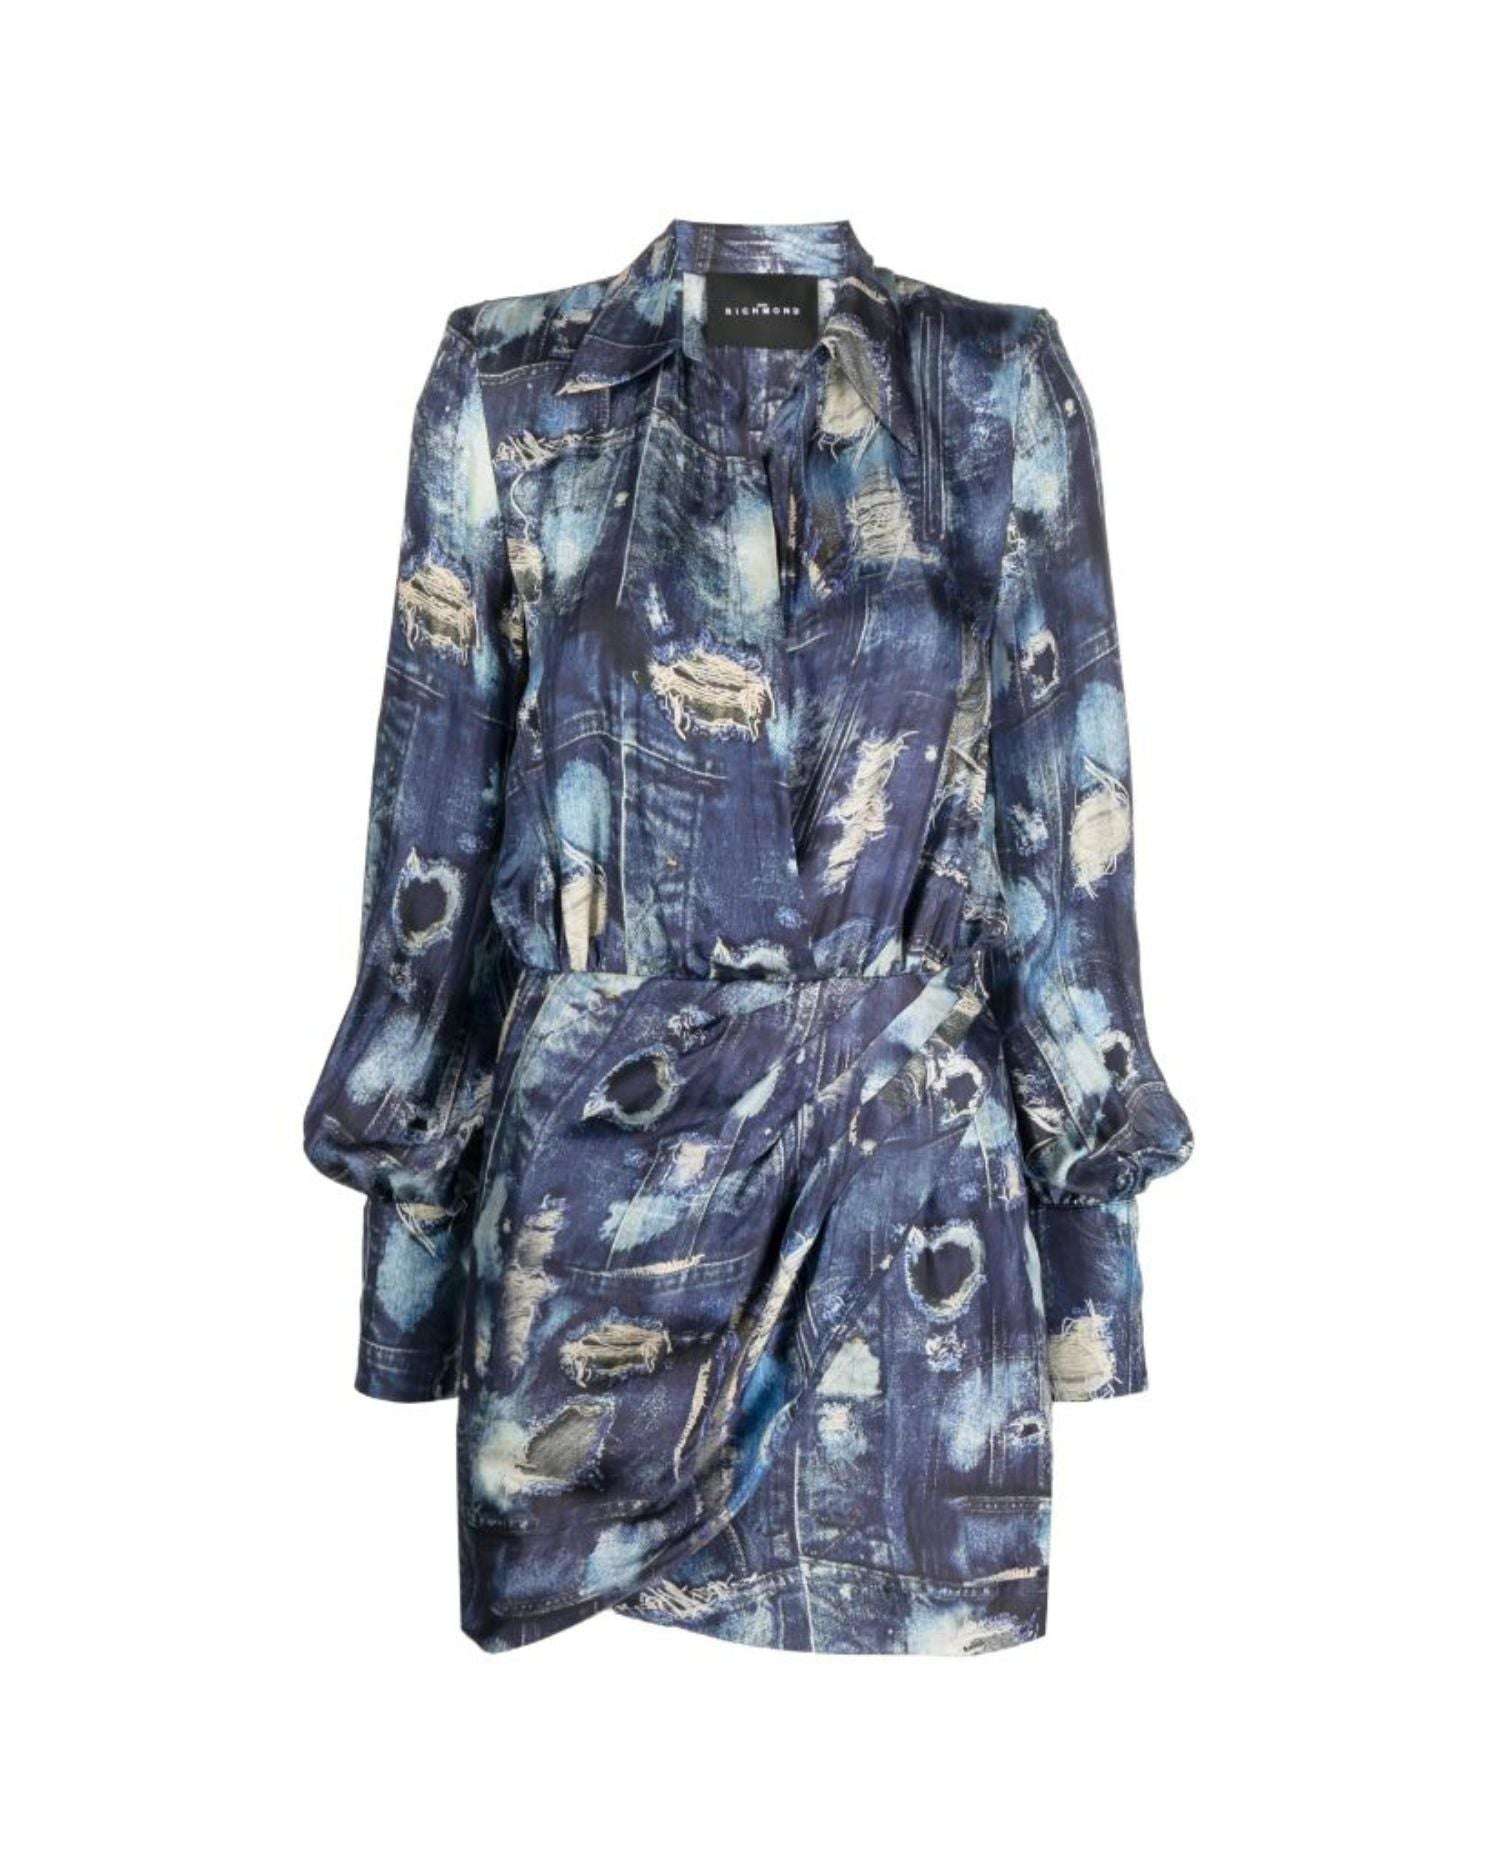 John Richmond Short Dress With Wrapped Skirt And Wide Neckline. Iconic Runway Denim-effect Pattern. In Fantasia